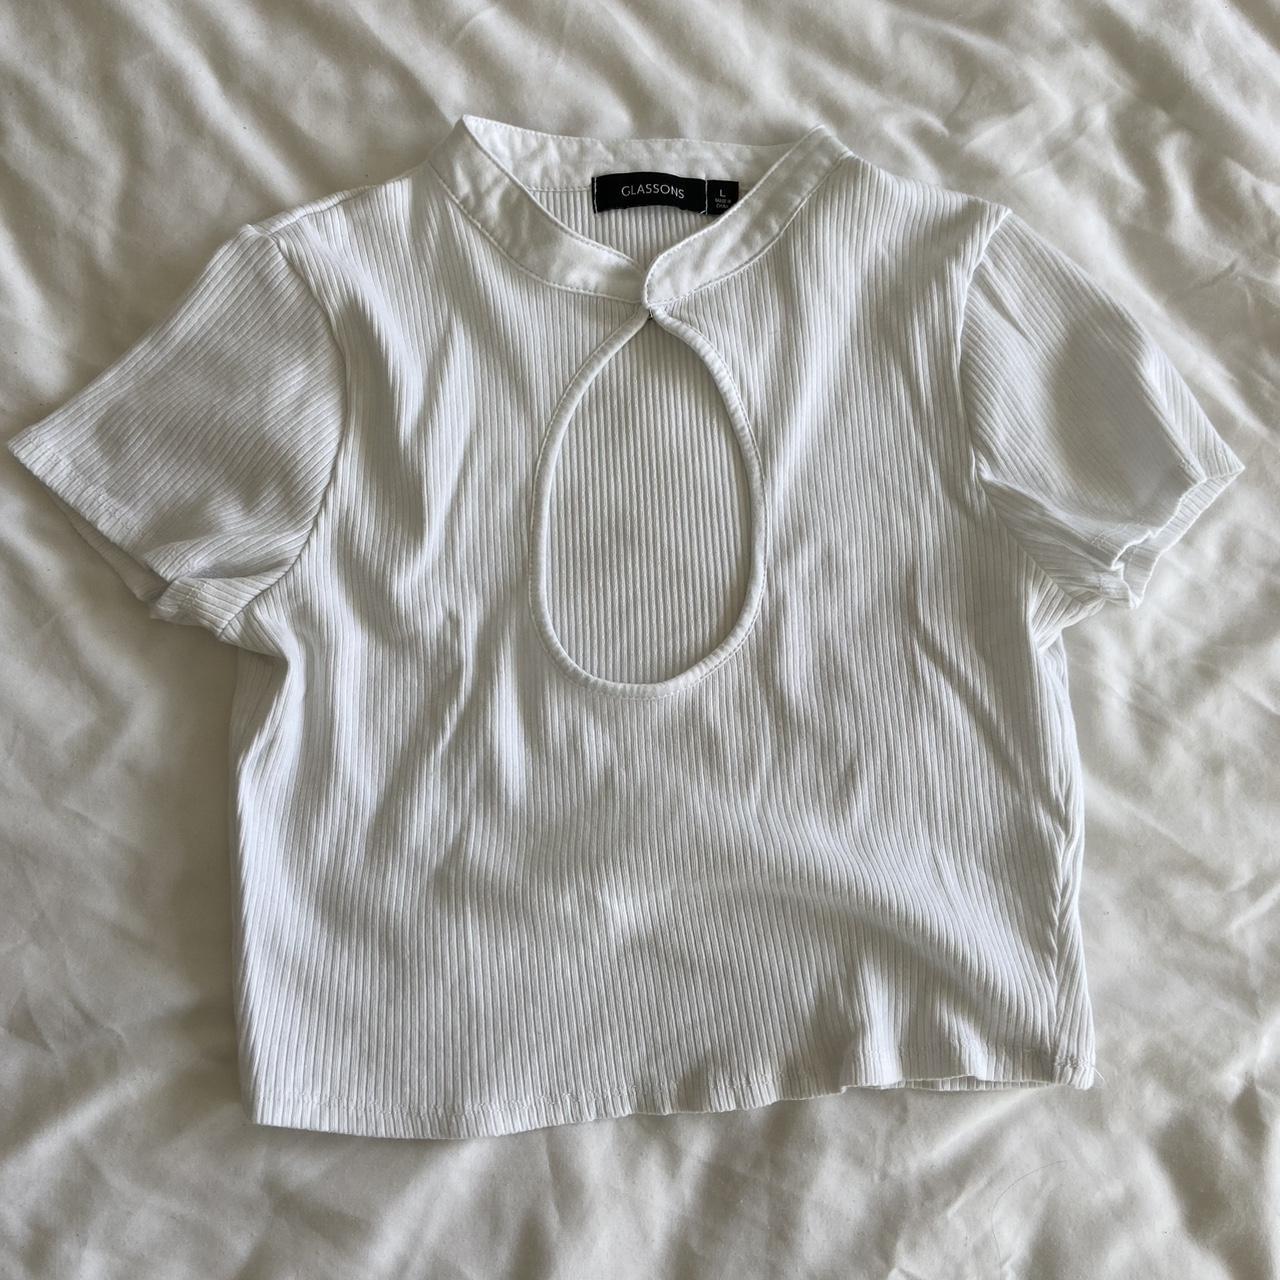 Glassons white crop top. Worn a few times and in... - Depop